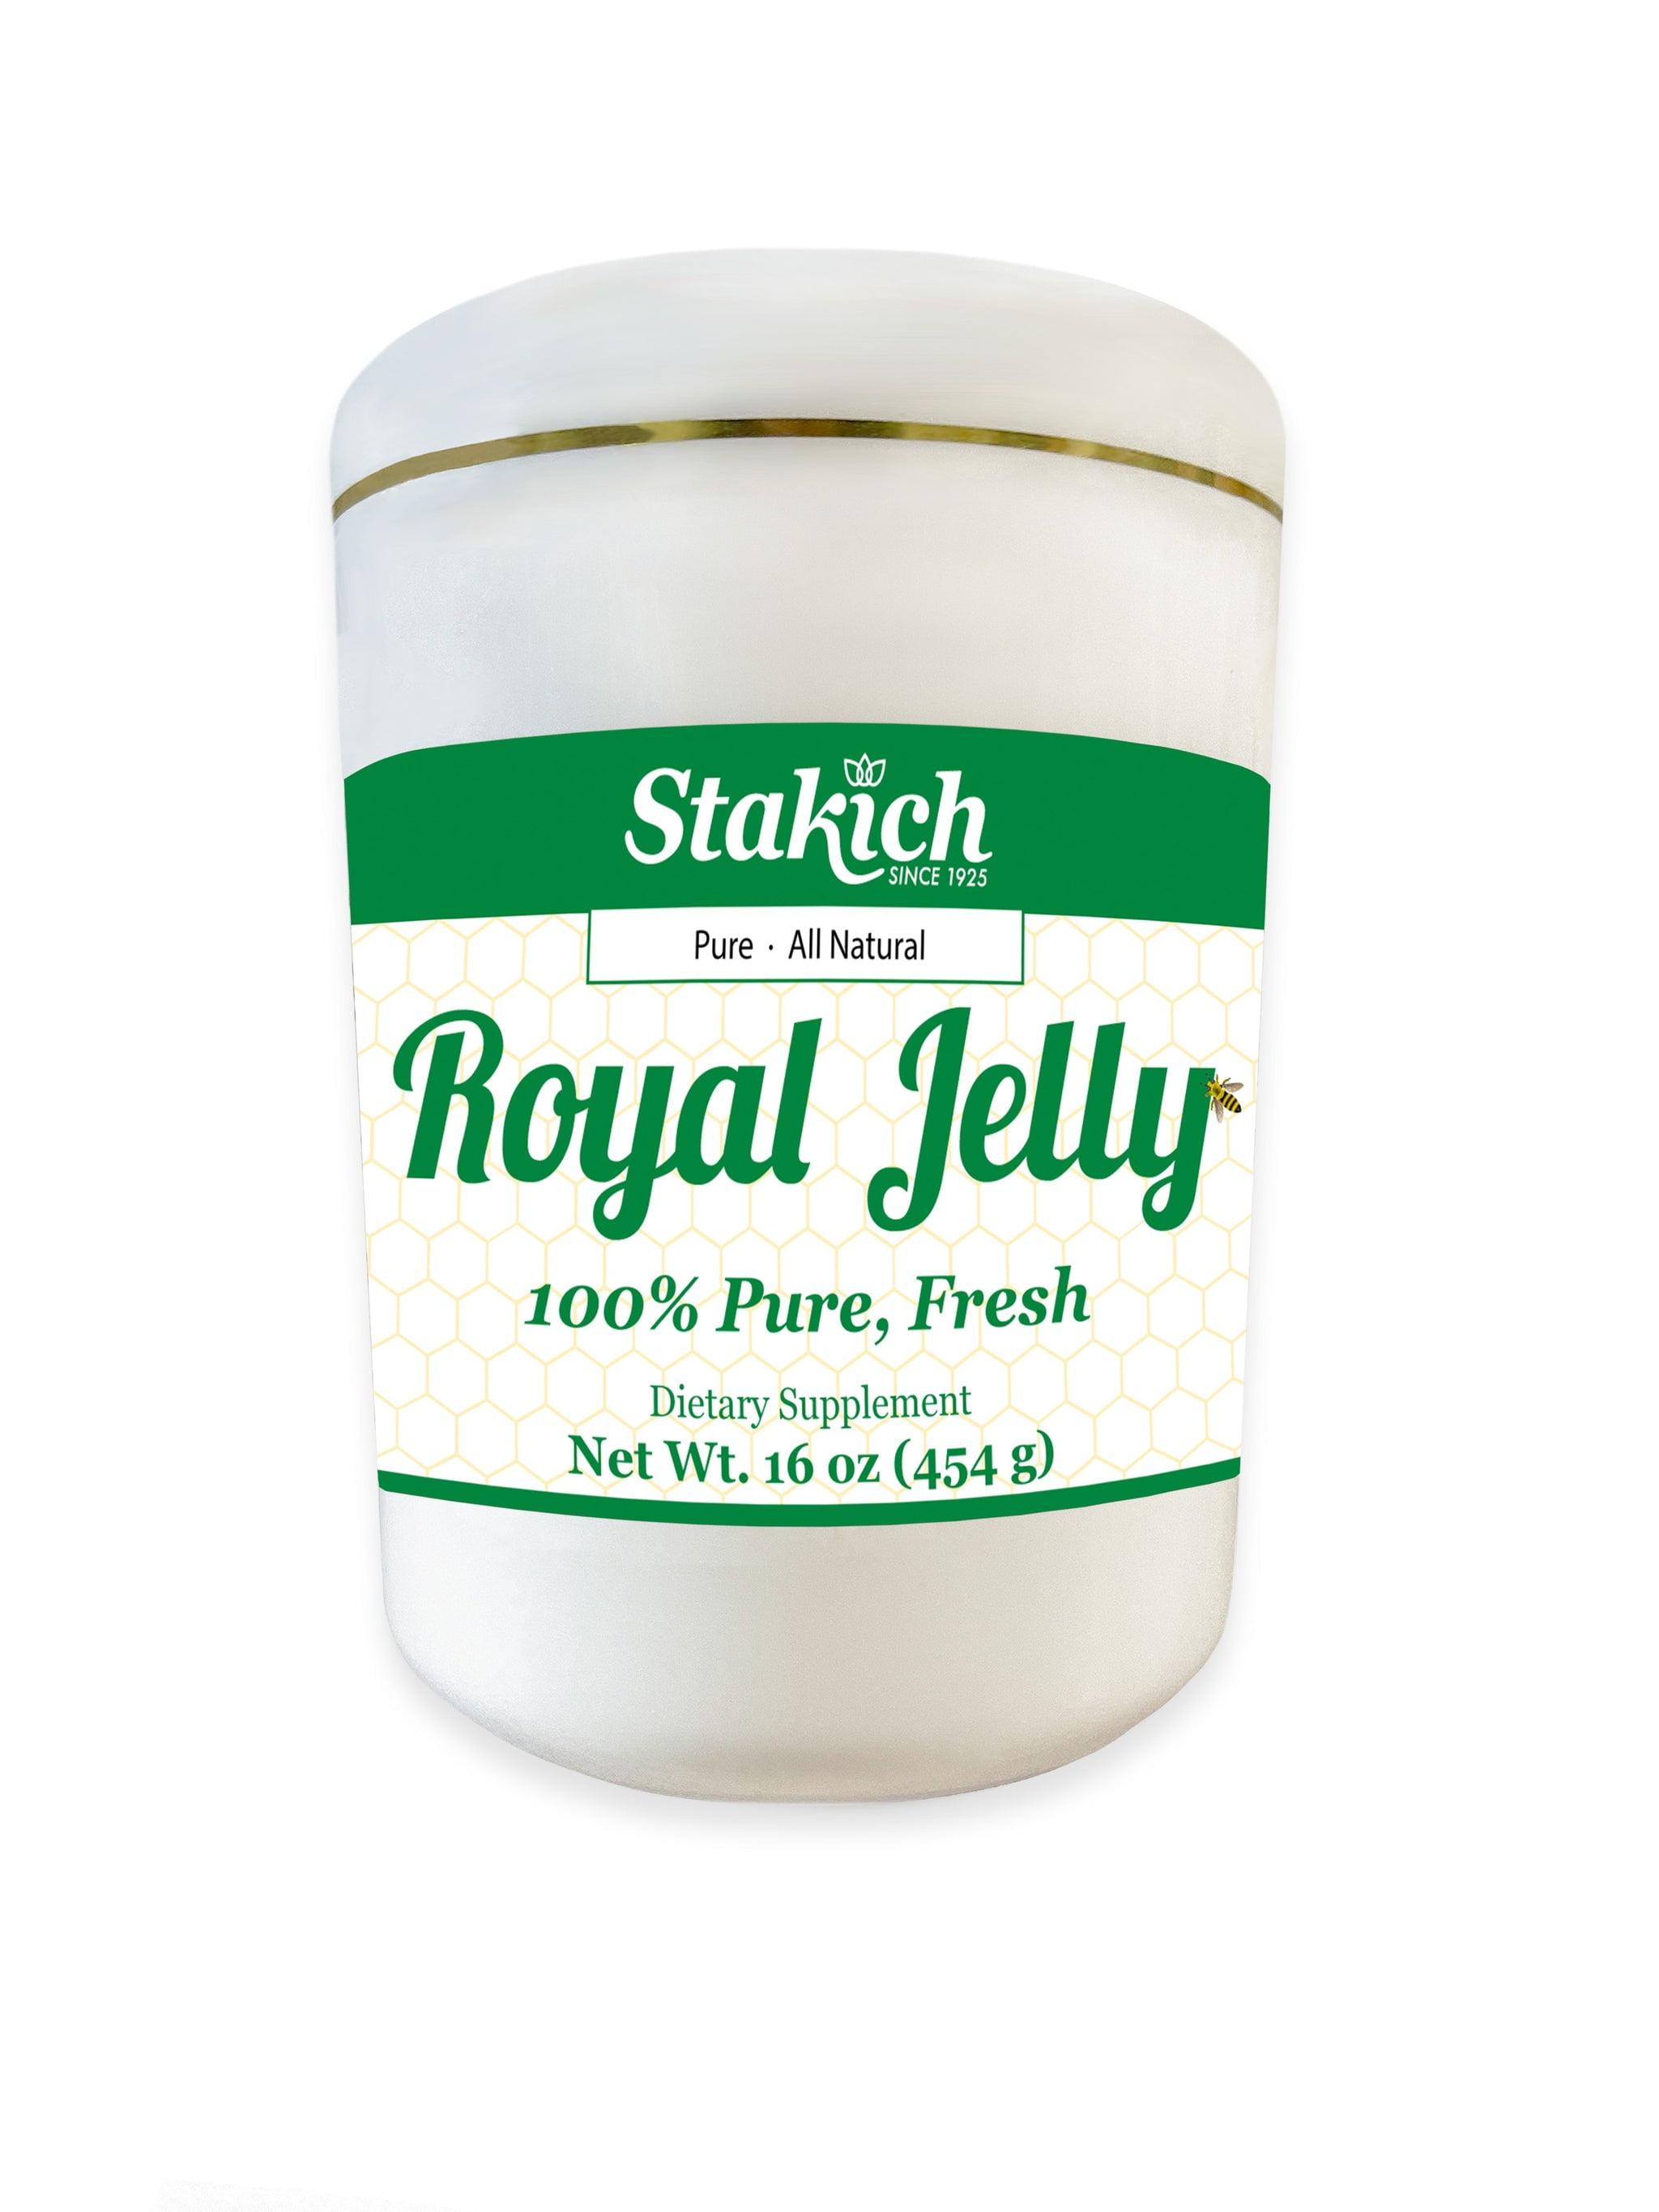 Stakich Fresh Royal Jelly 16 oz (1 lb) - Pure, All Natural